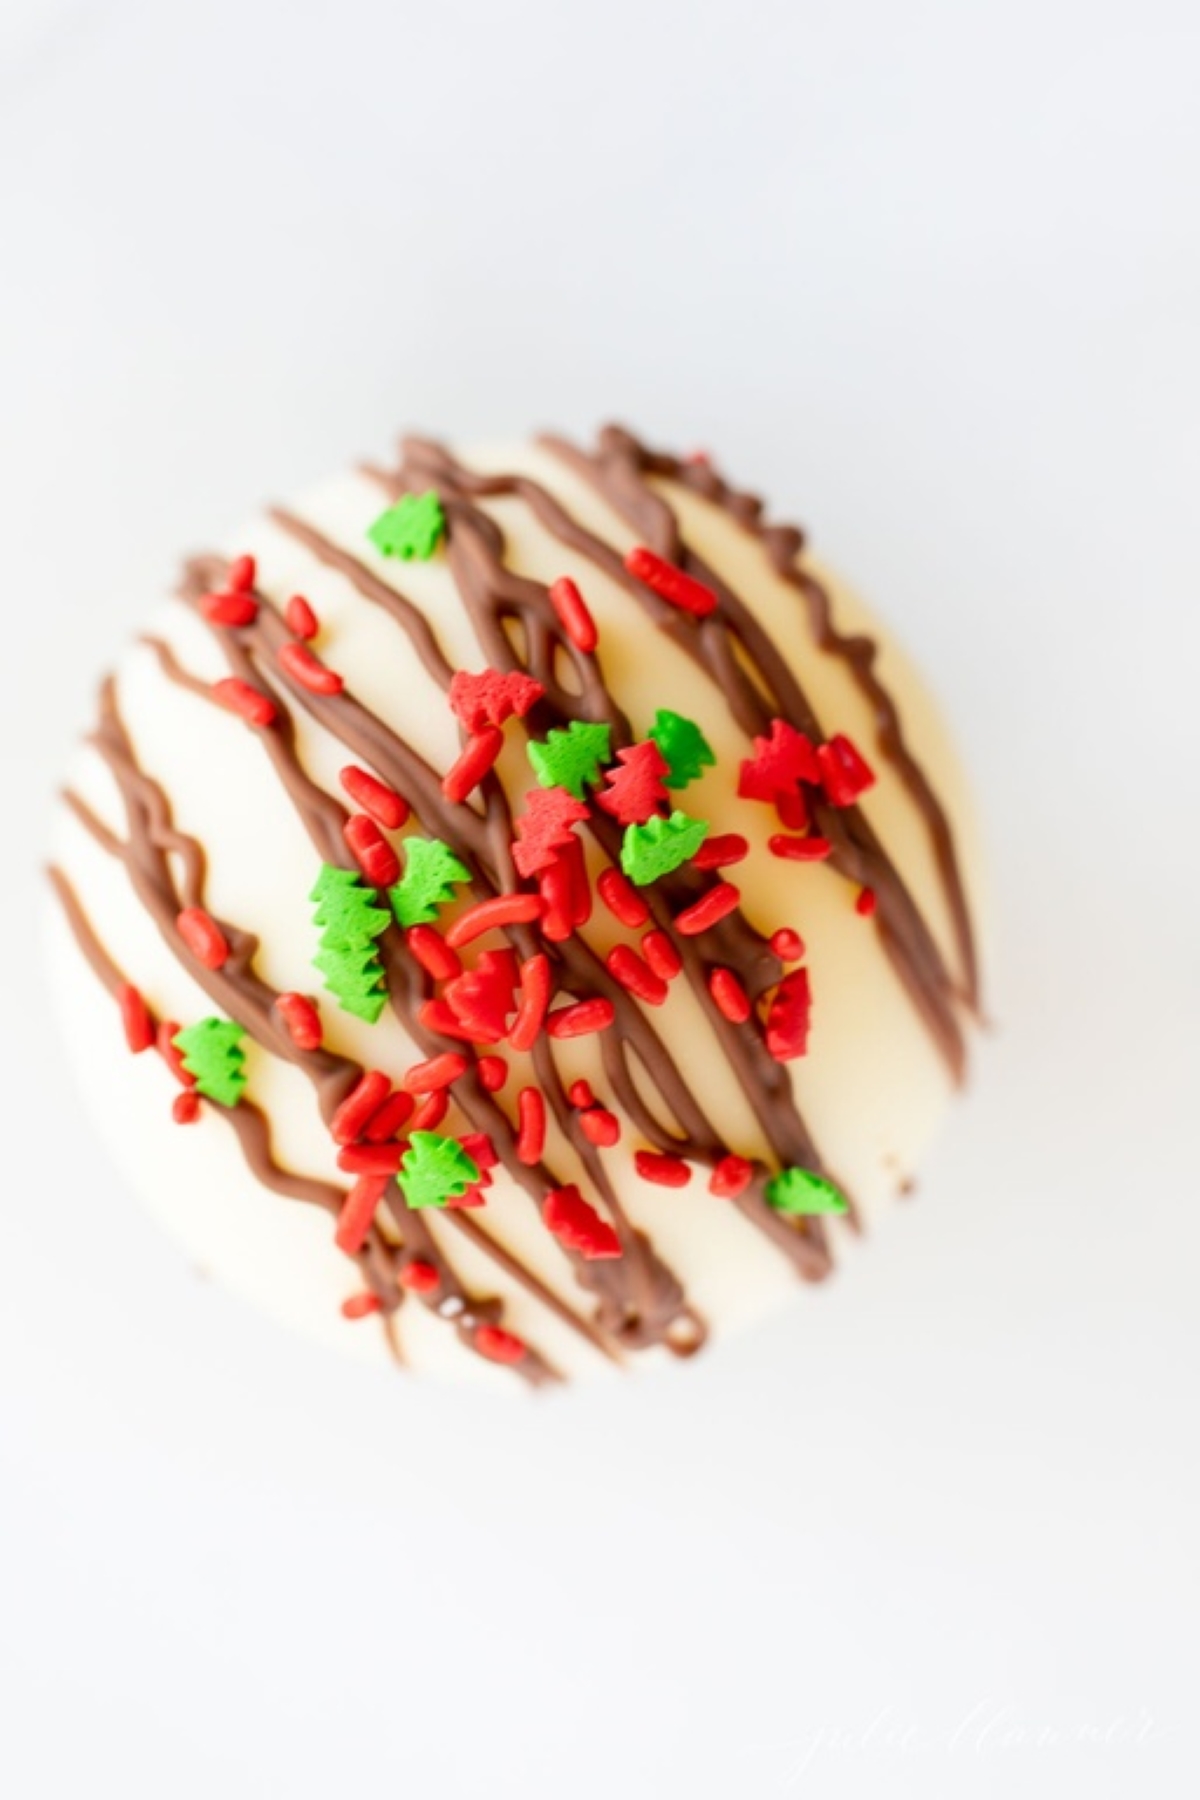 A white chocolate hot chocolate bomb, covered in red and green sprinkles.